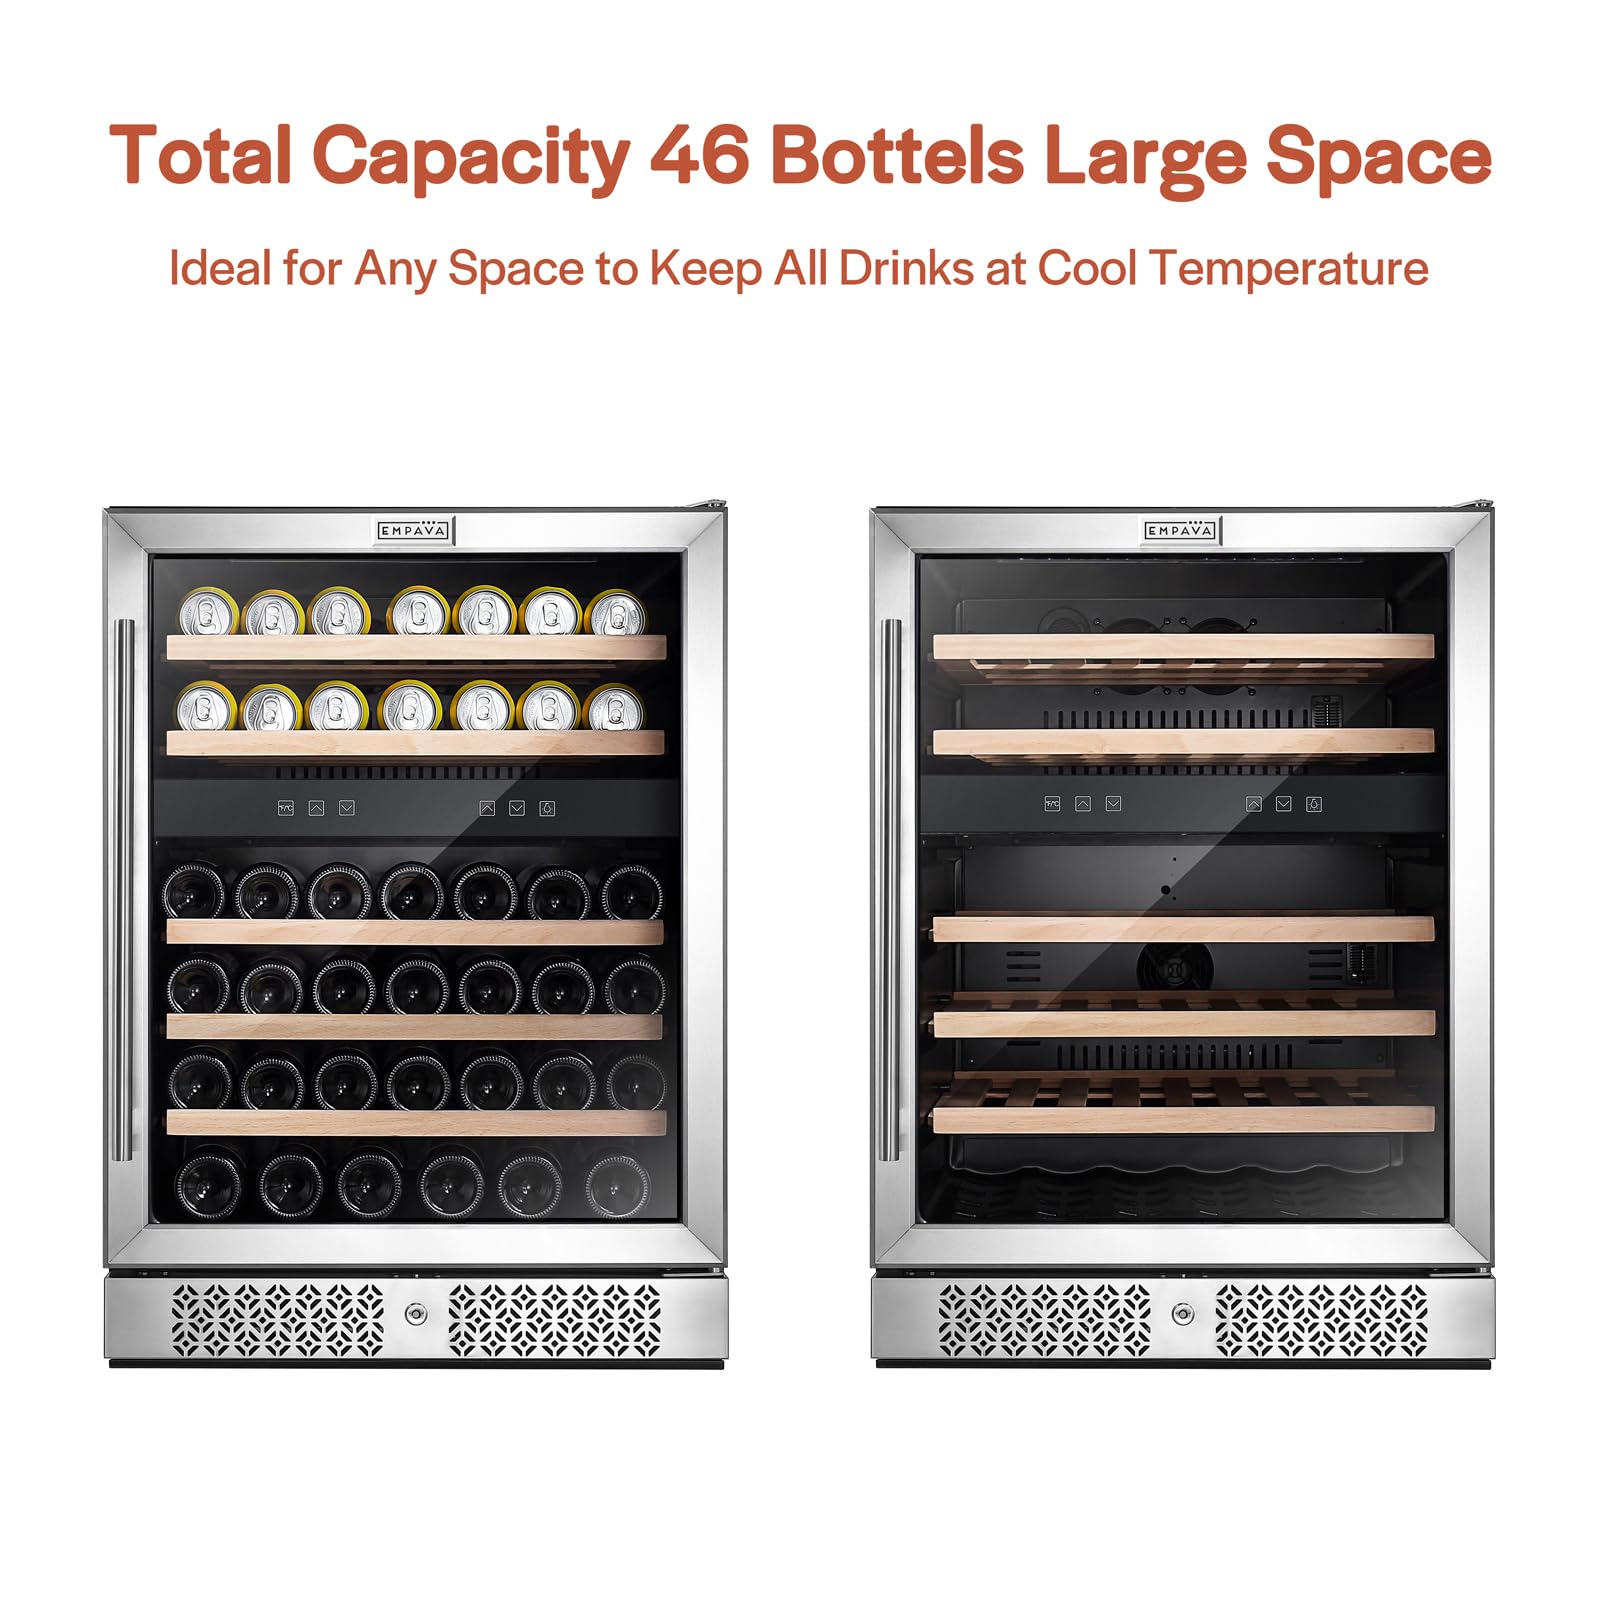 Empava Refrigerator 24 inch Double Zone Fridge for 46 Bottles Built in or Freestanding Compressor Chiller Stainless Steel Glass Door for Home, Office Bar Wine Cooler with Wood Shelves, Silver